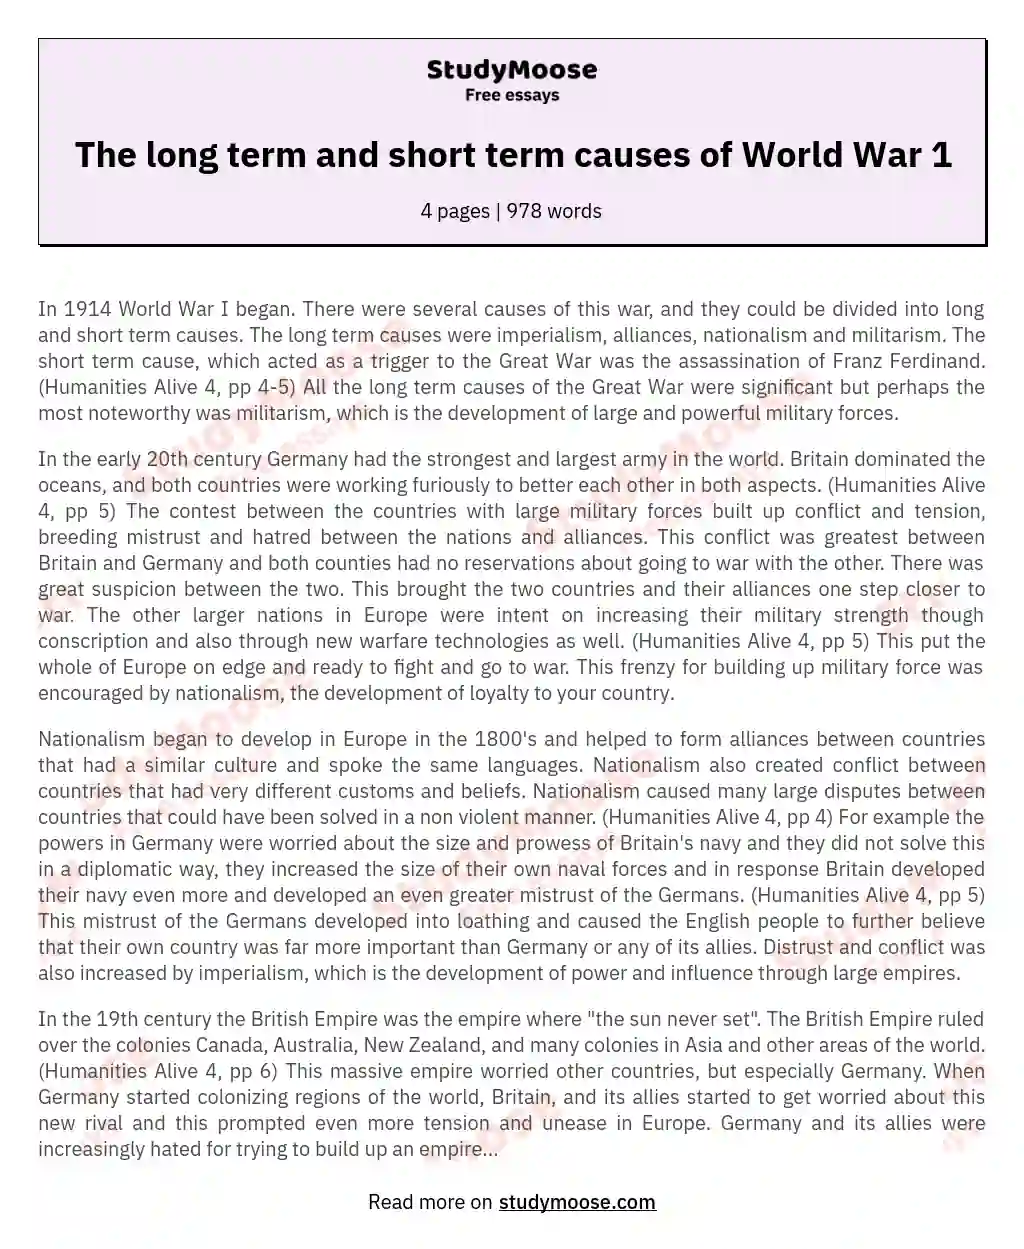 The long term and short term causes of World War 1 essay